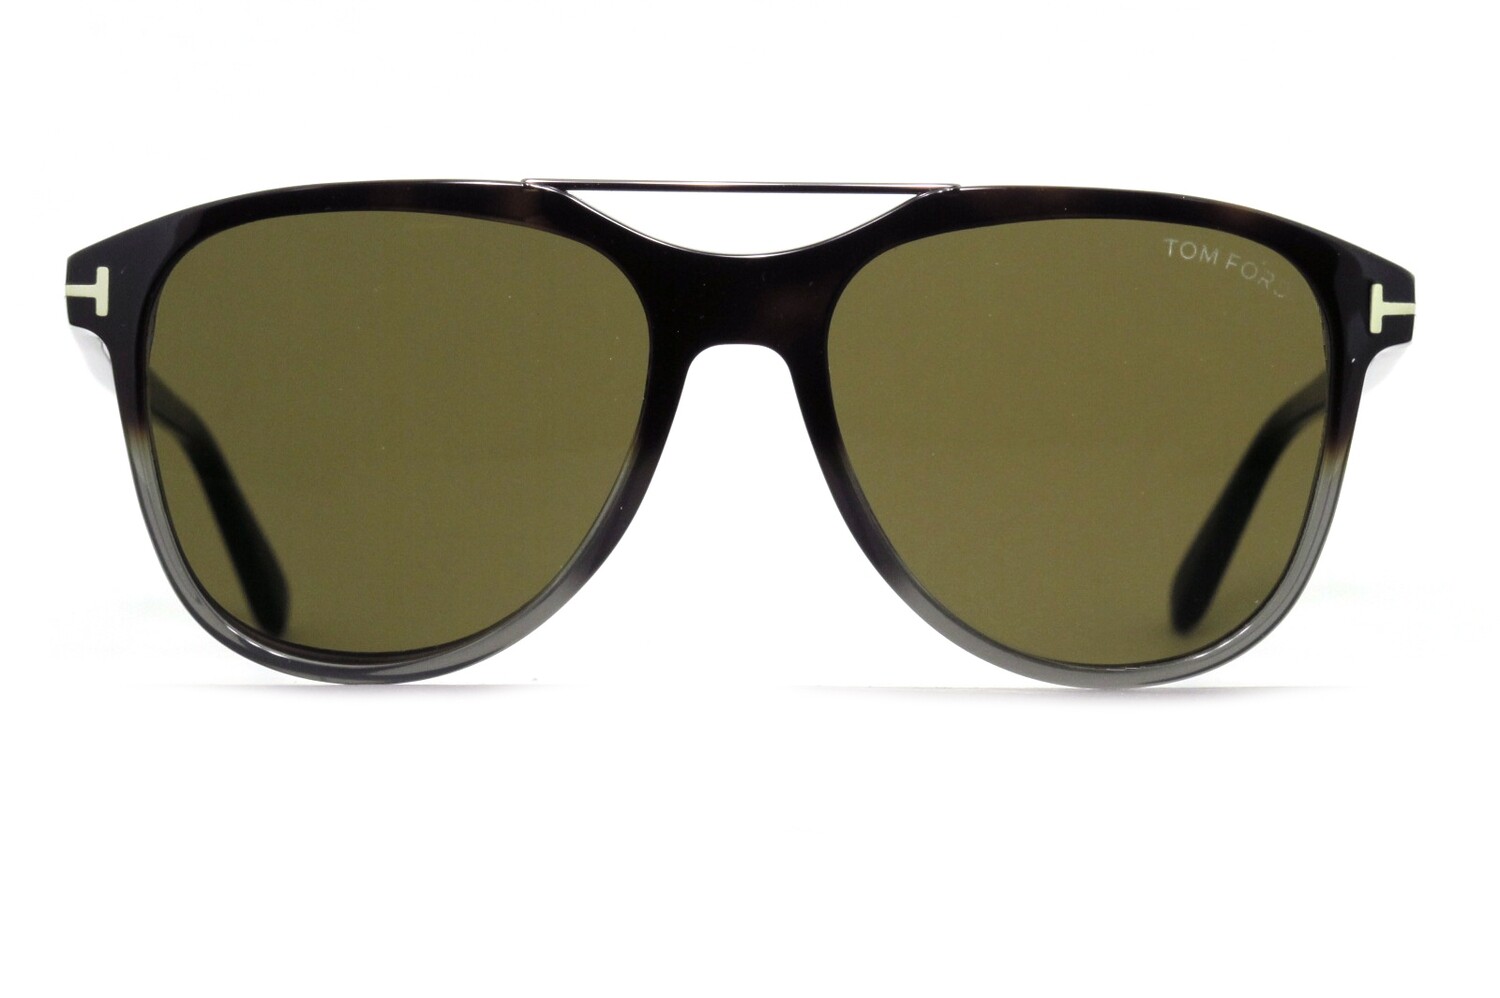 Damian TF1098 by Tom Ford